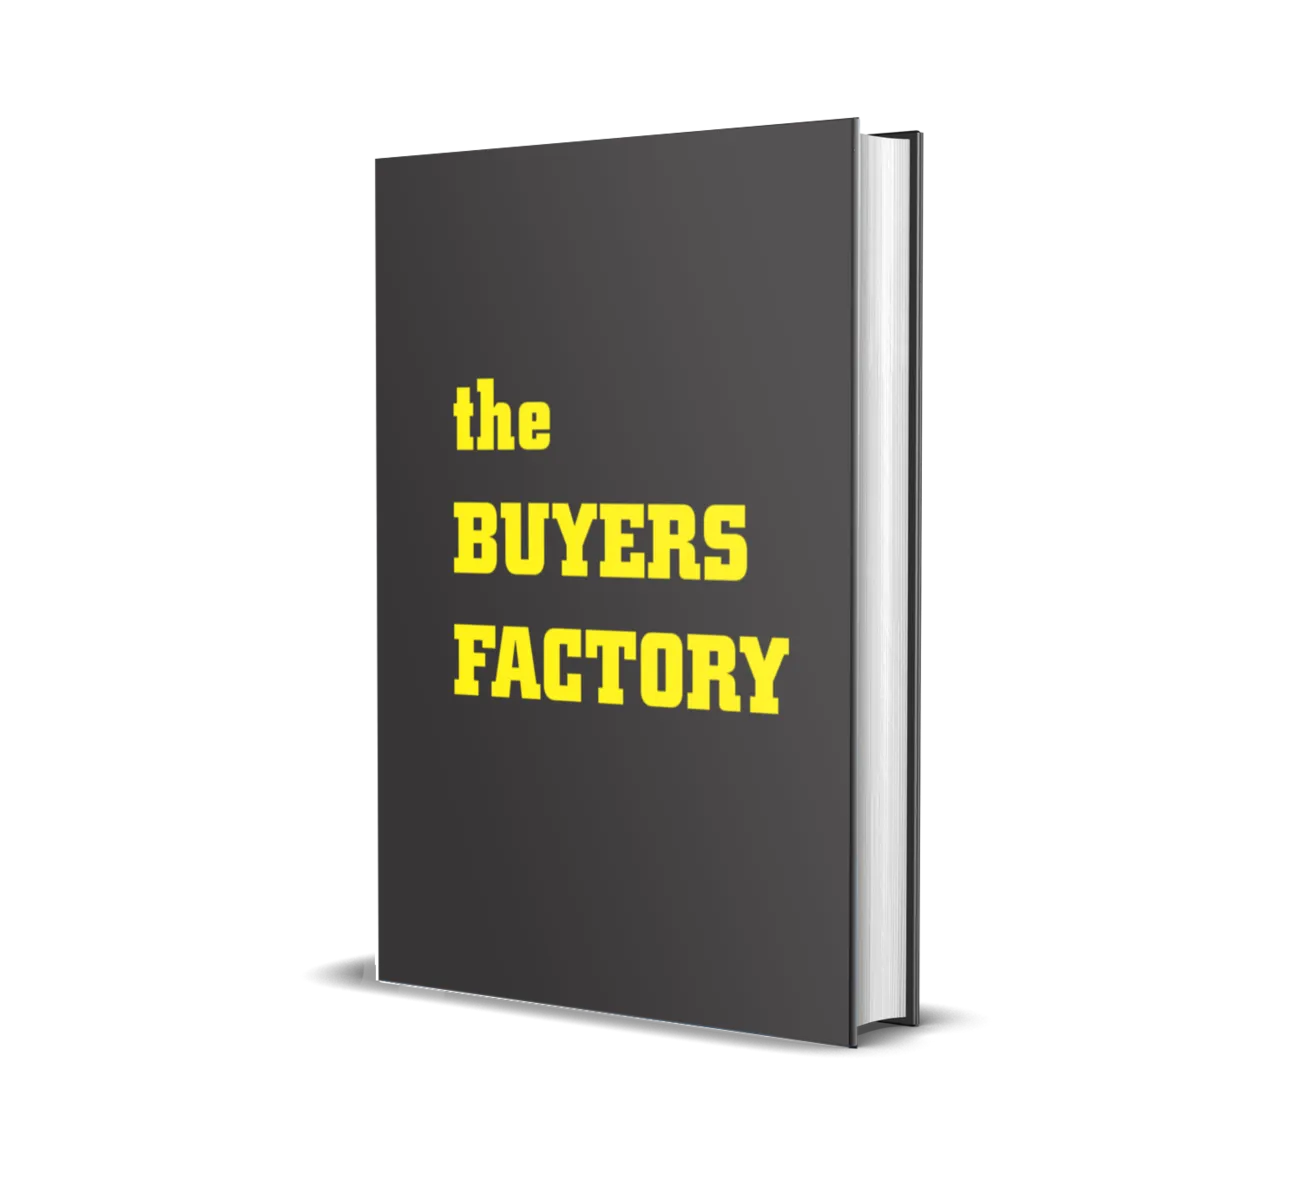 the buyers factory book program mag.consulting